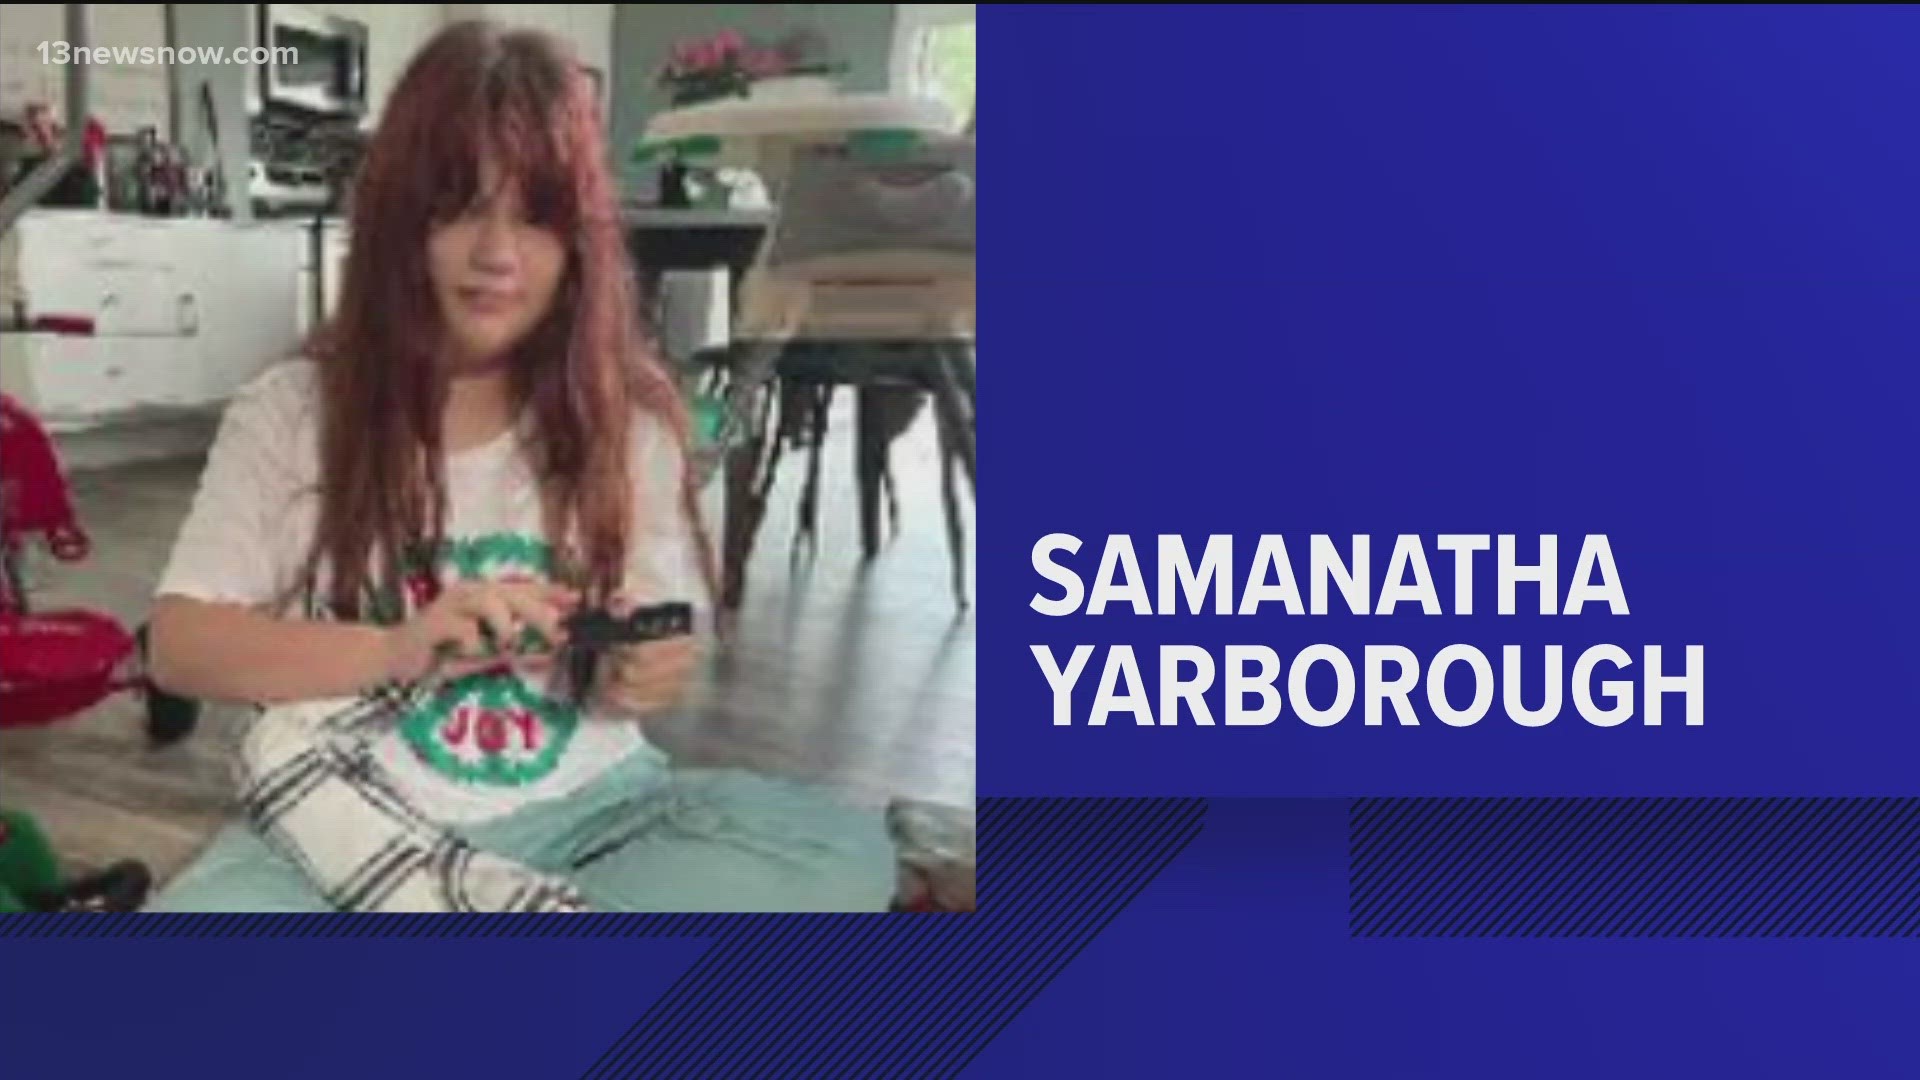 Her mother has said Samantha Yarborough was talking to an older man from Richmond online and he may have picked her daughter up.